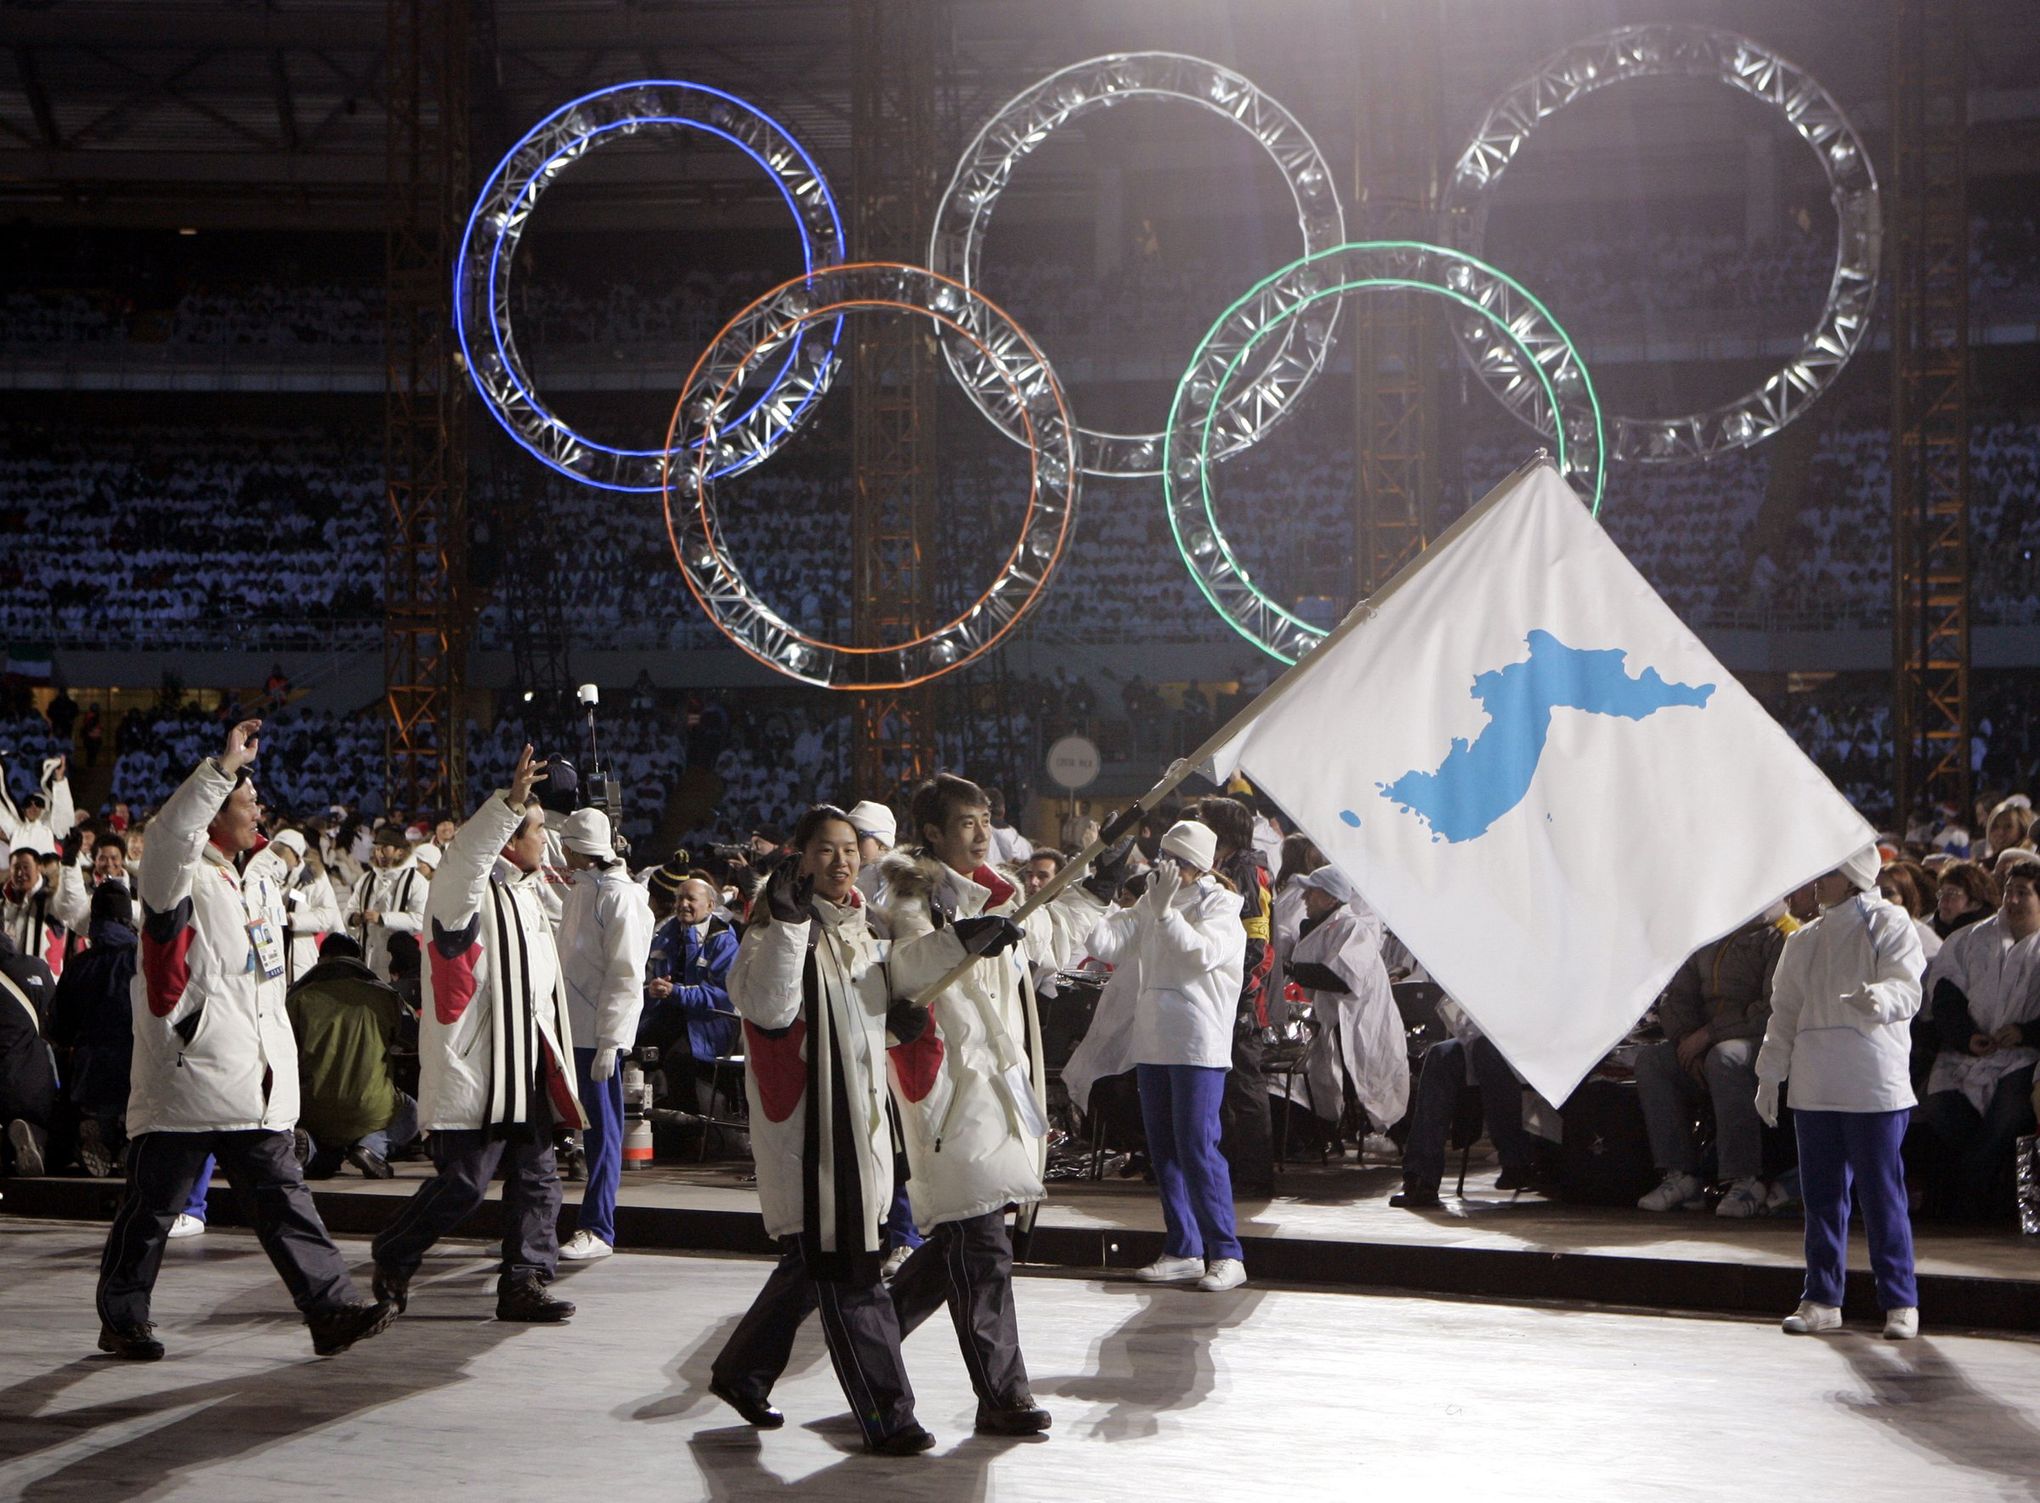 Winter Olympics Opening Ceremony: Pyeongchang Welcomes The World